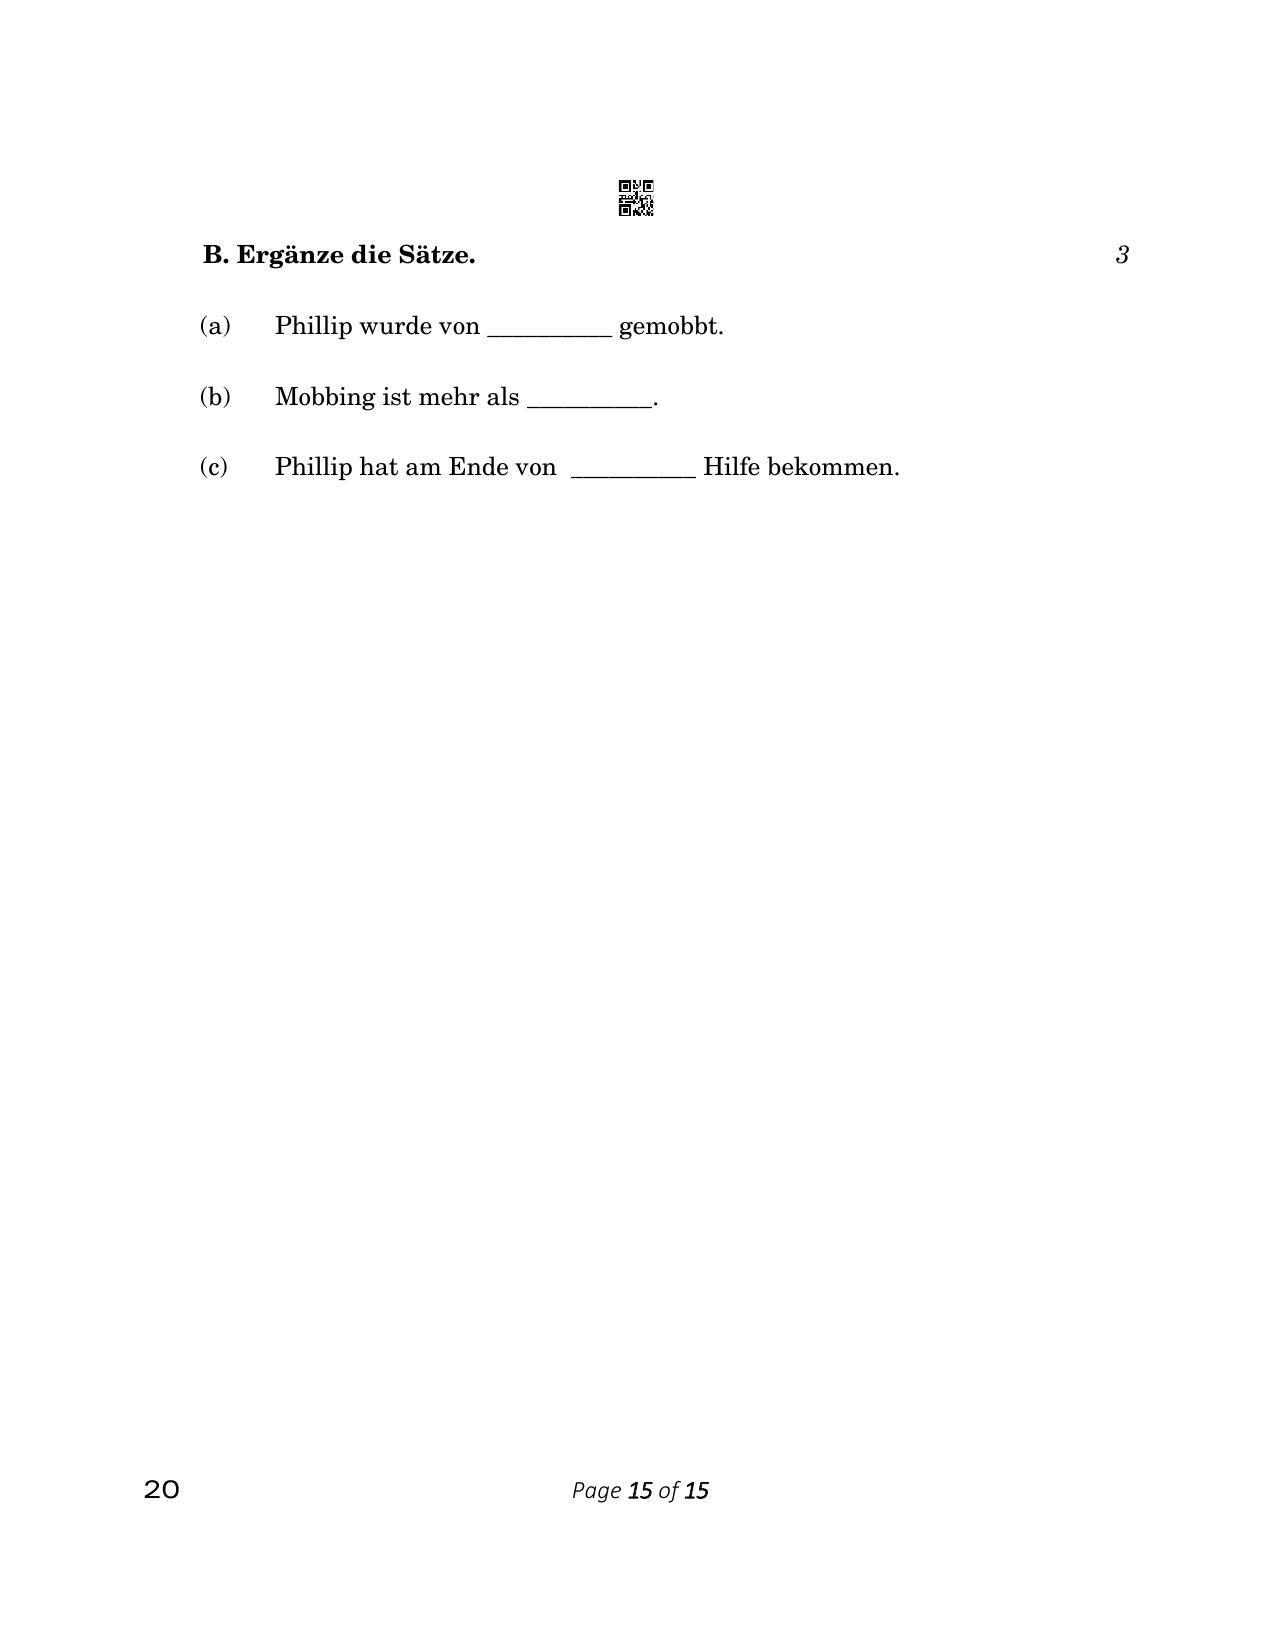 CBSE Class 12 20_German 2023 Question Paper - Page 15